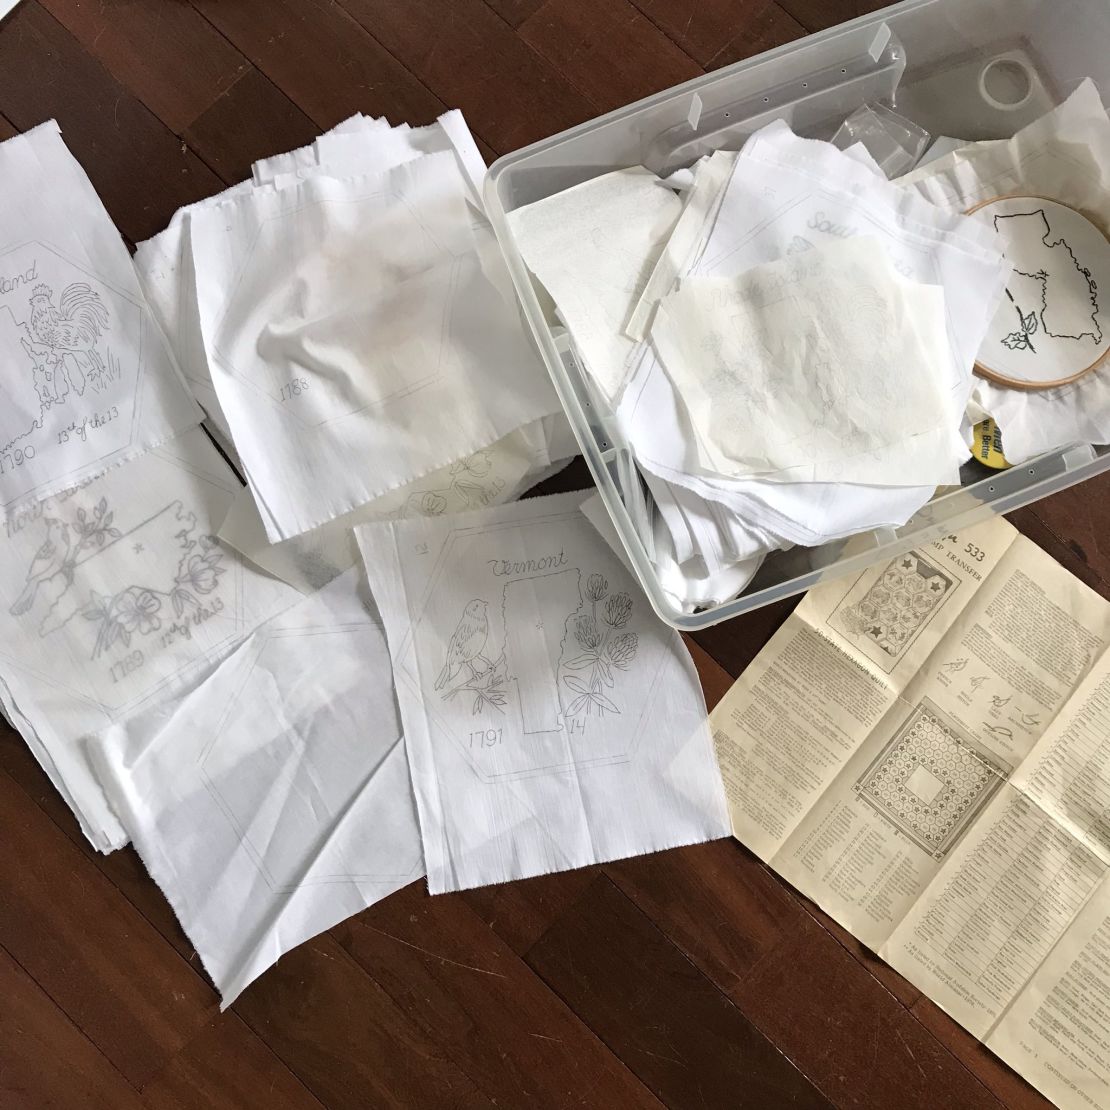 The contents of the box that held Rita Smith's unfinished quilt.